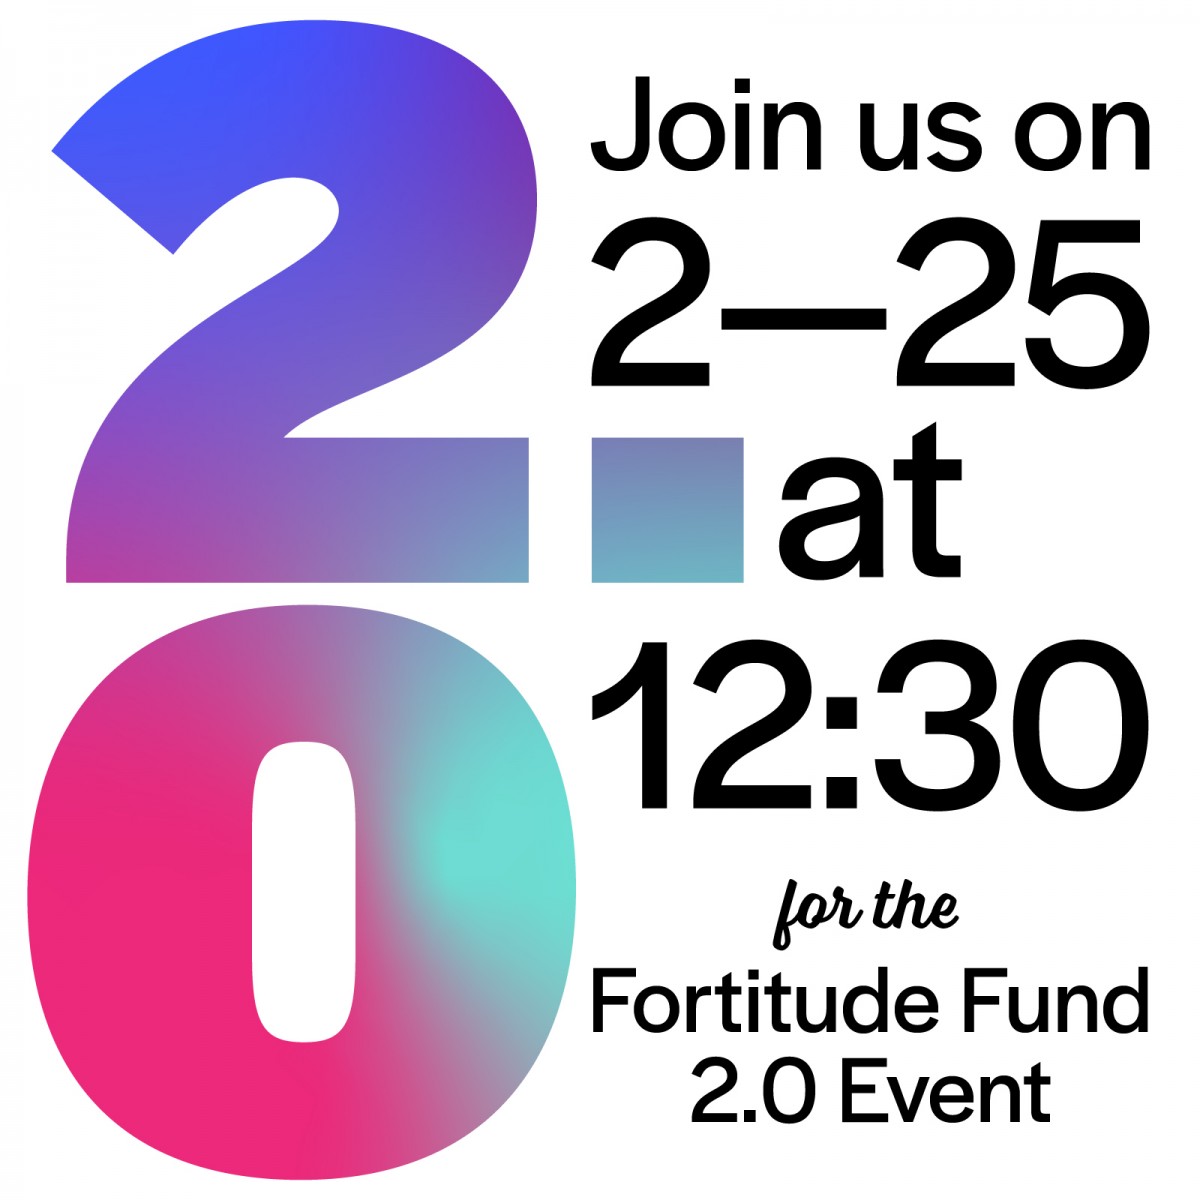 Join us on February 25 at 12:30 pm for the Fortitude Fund 2.0 event